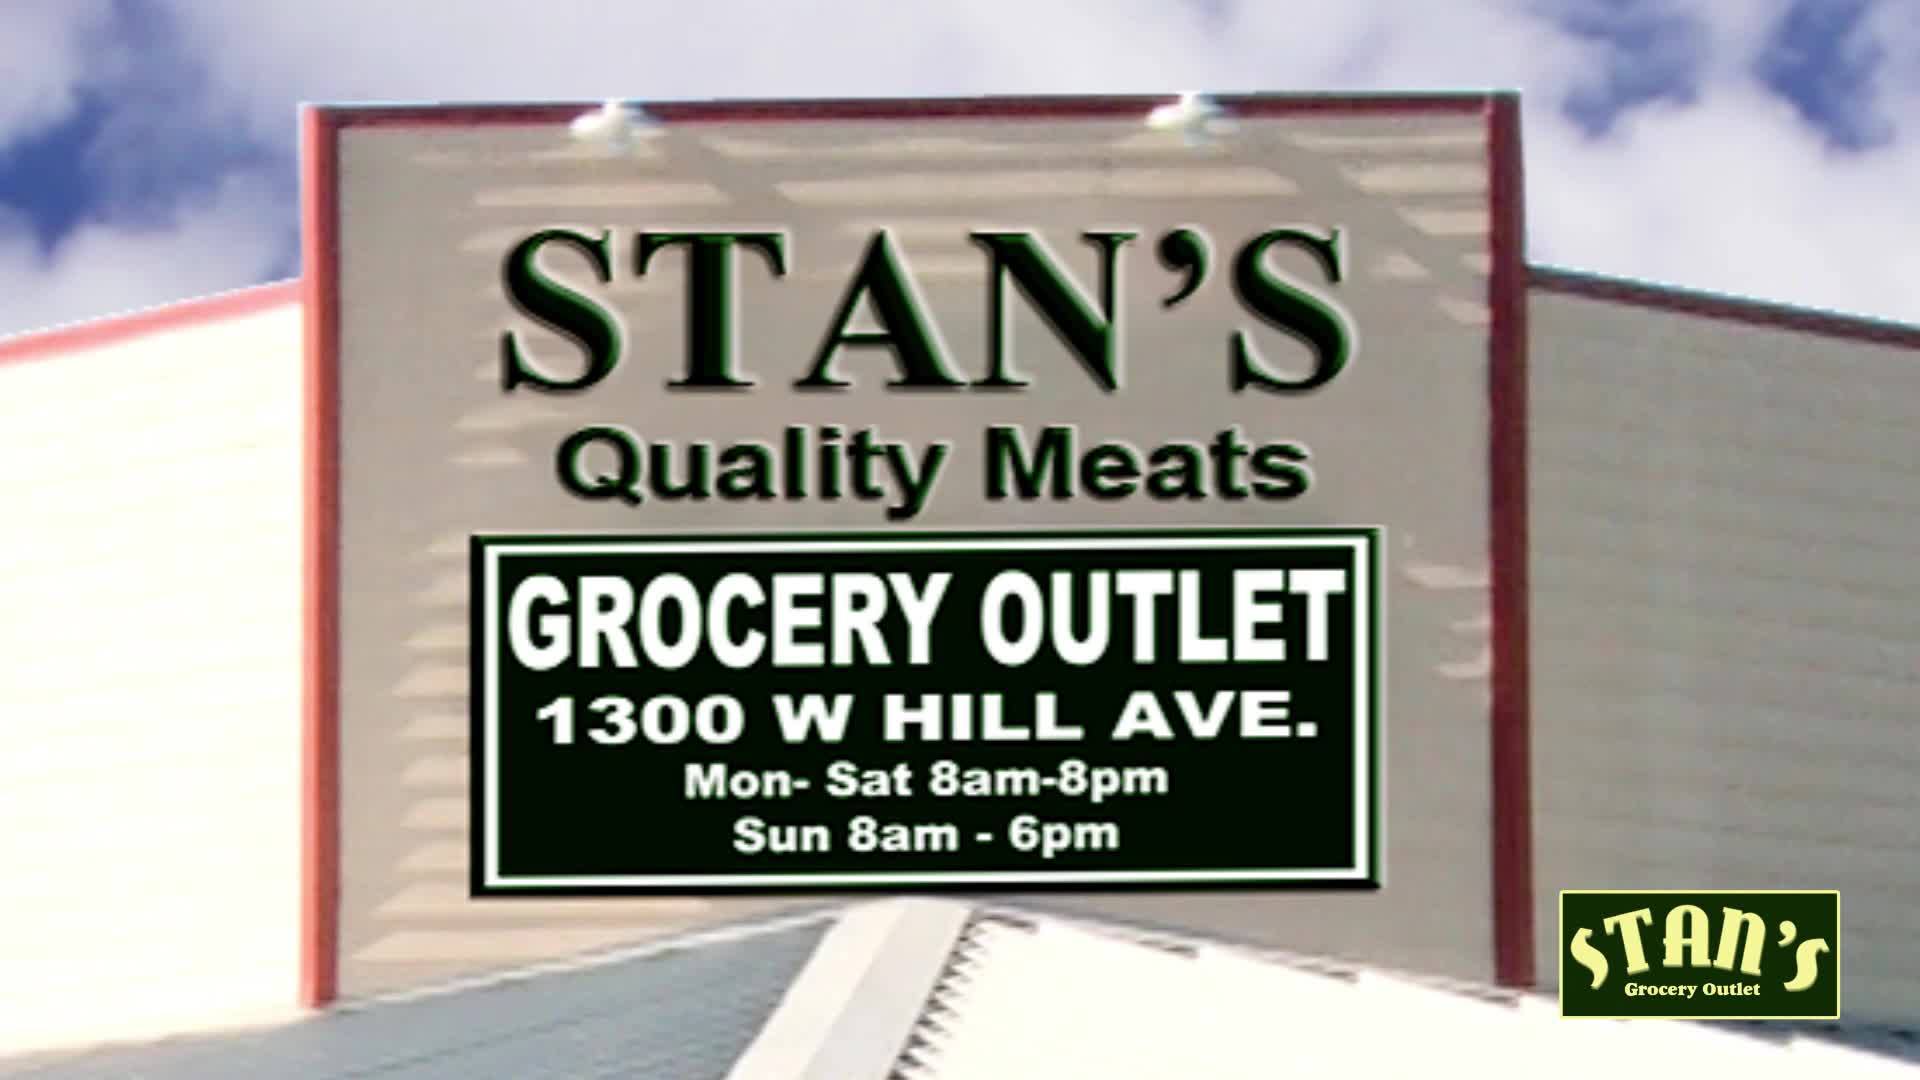 stans-quality-meats-logo.jpg